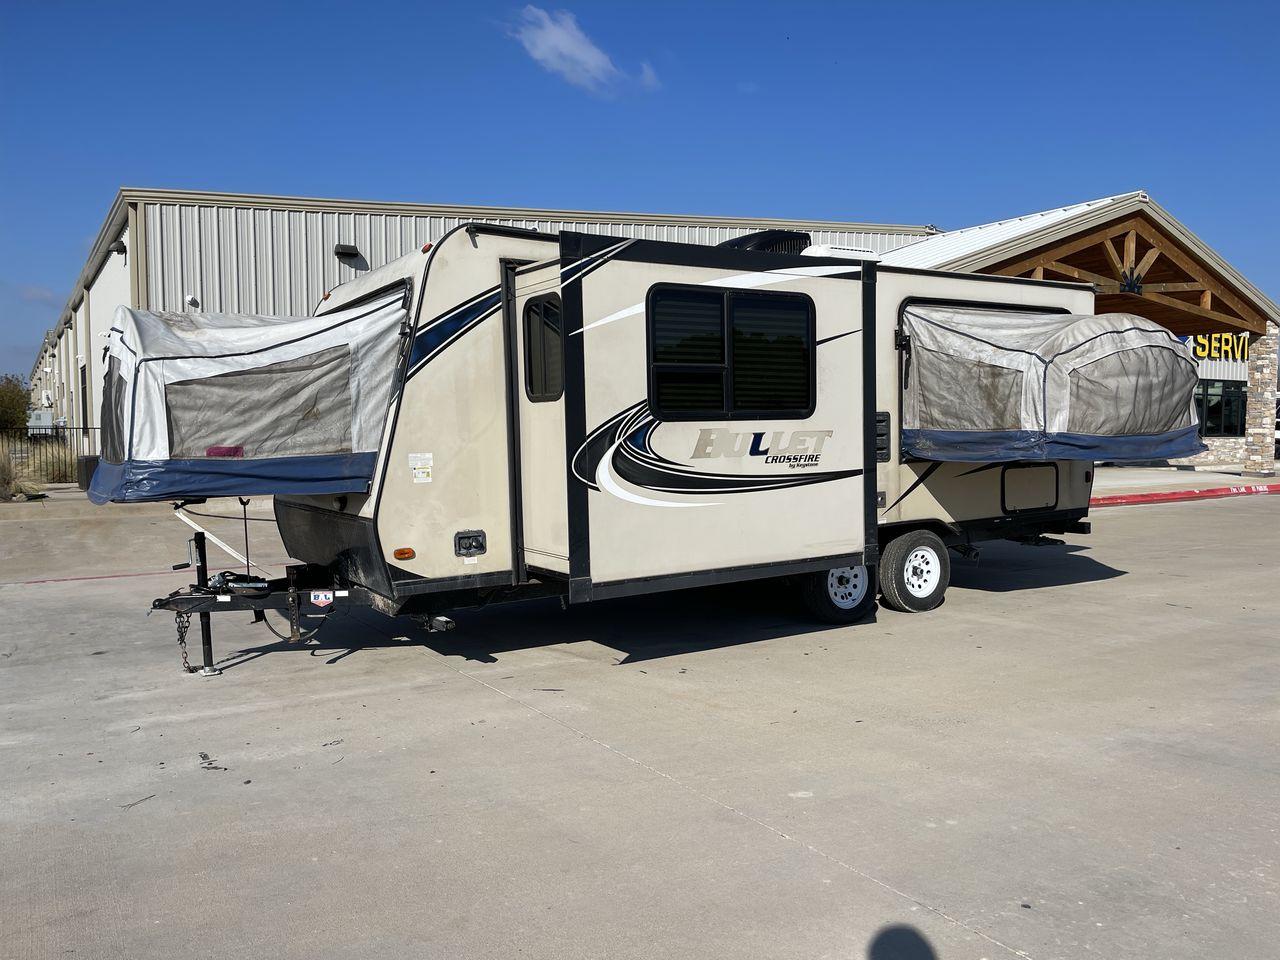 2018 BULLET CROSSFIRE 2190EX (4YDT21923JT) , Length: 25.08 ft. | Dry Weight: 4,410 lbs. | Gross Weight: 6,300 lbs. | Slides: 1 transmission, located at 4319 N Main St, Cleburne, TX, 76033, (817) 678-5133, 32.385960, -97.391212 - The 2018 Bullet Crossfire 2190EX is a lightweight vacation trailer that can be used for a variety of activities. This trailer is 25.08 feet long and weighs 4,410 pounds dry. It is easy to pull and move, which makes it great for both short trips and longer vacations. Even though it's small, the Cross - Photo #24